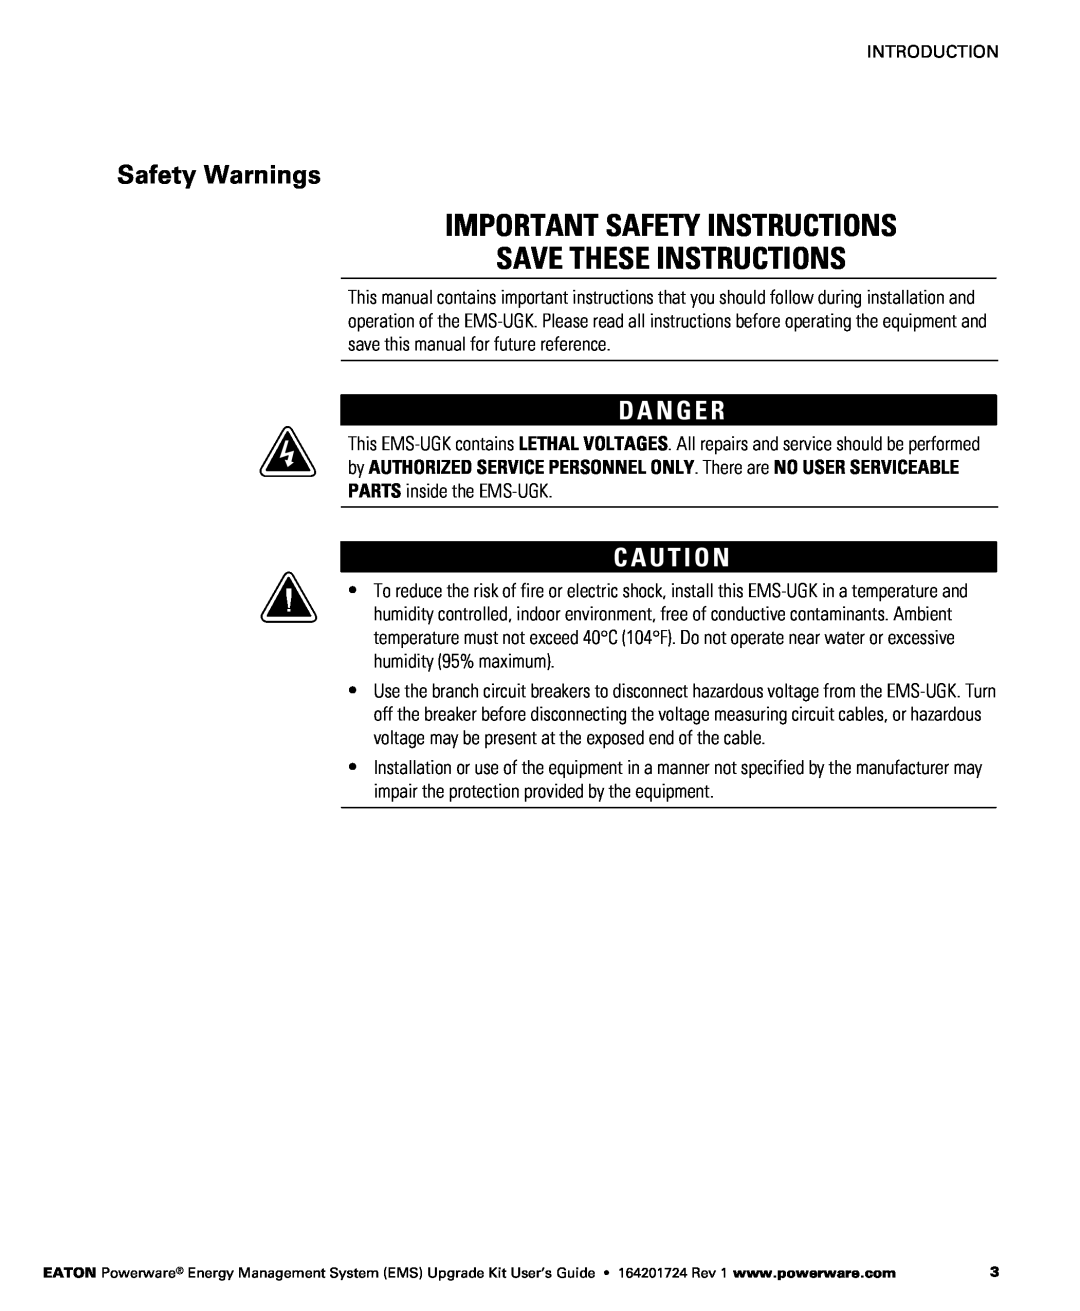 Powerware 380/220V Important Safety Instructions Save These Instructions, Safety Warnings, D A N G E R, C A U T I O N 